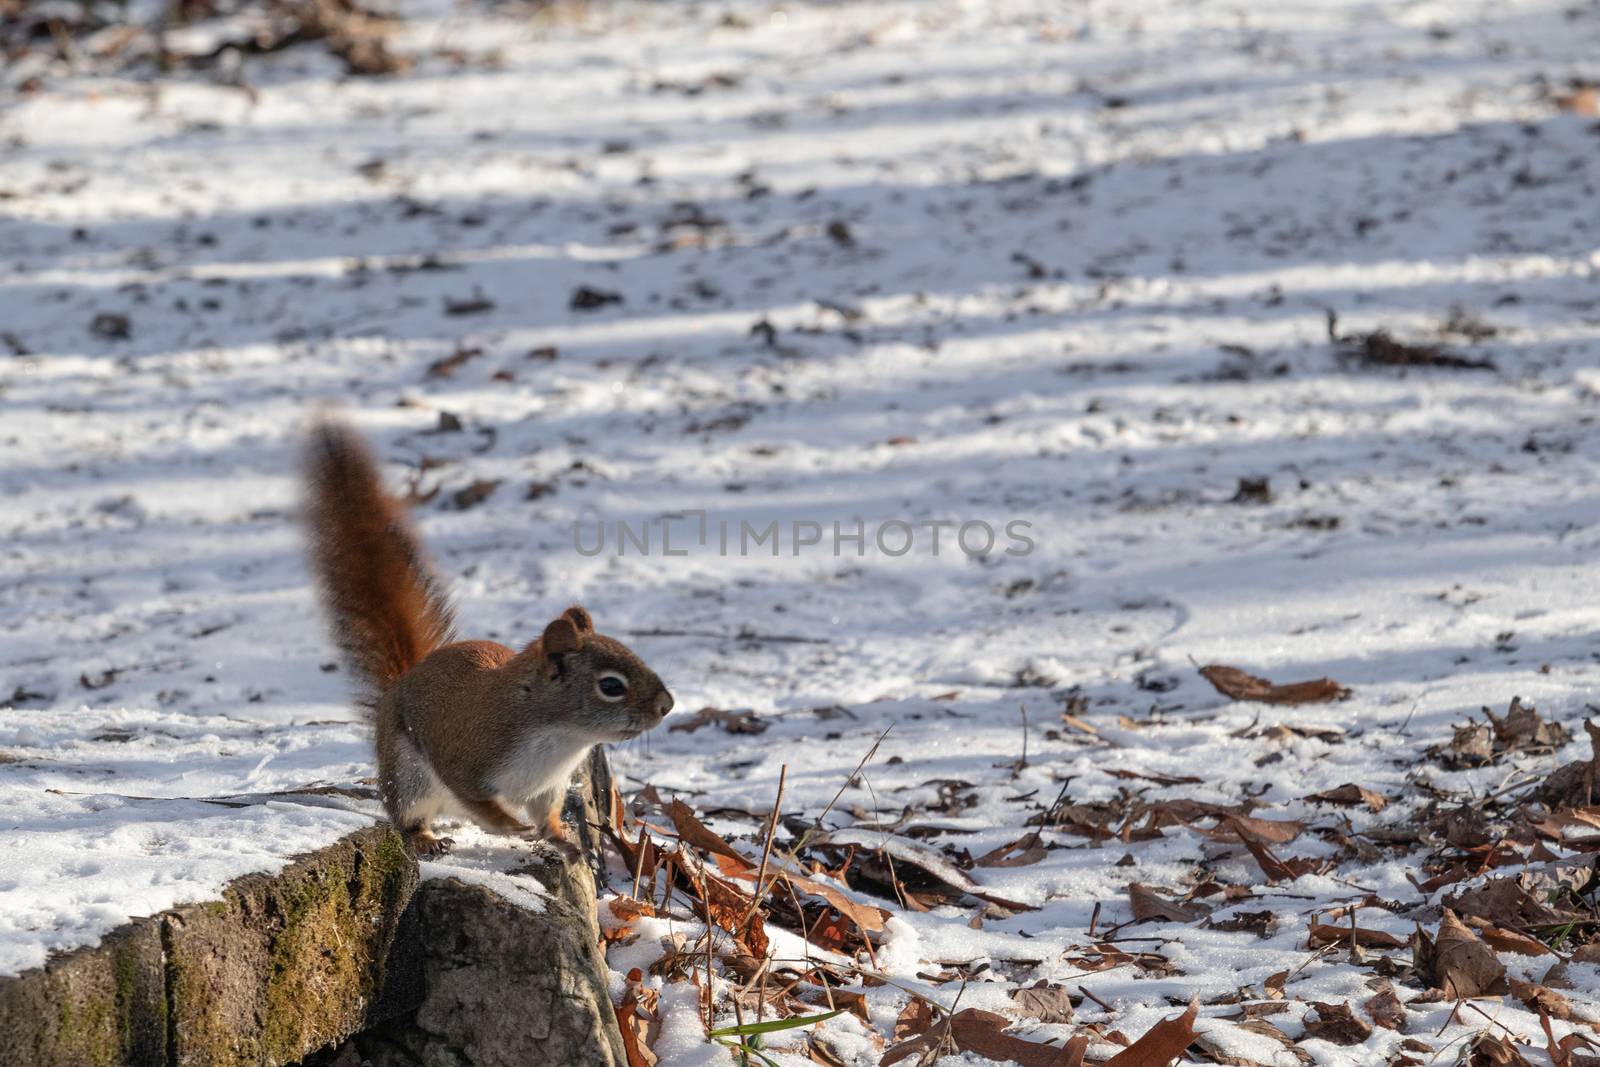 A wild American red squirrel lifts its tail and stands up on its hind legs as it cautiously looks around from the edge of a boardwalk leading onto a nature trail footpath in the woods.